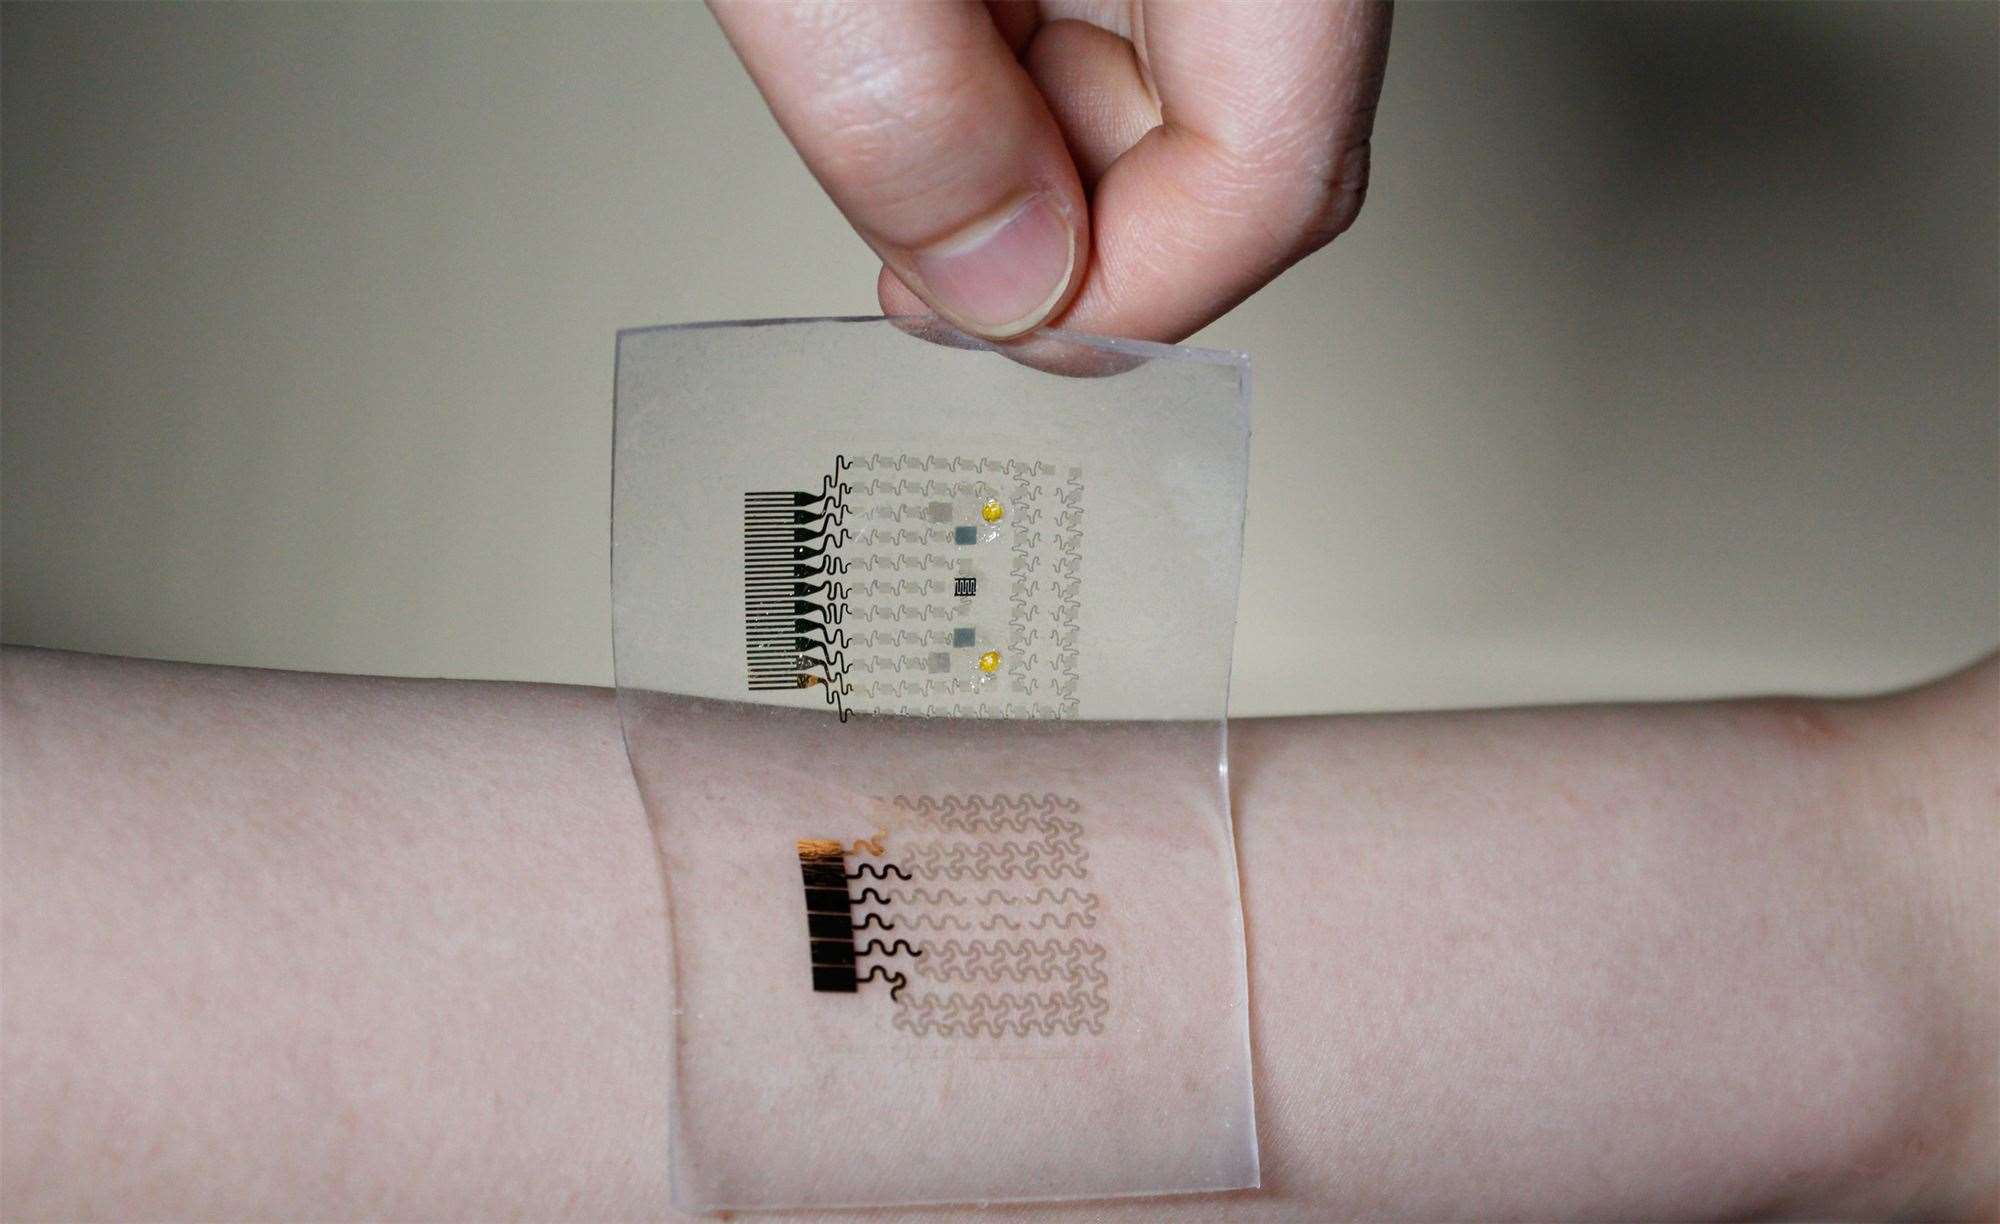 This Wearable Patch Uses Sweat To Monitor Blood Glucose Levels